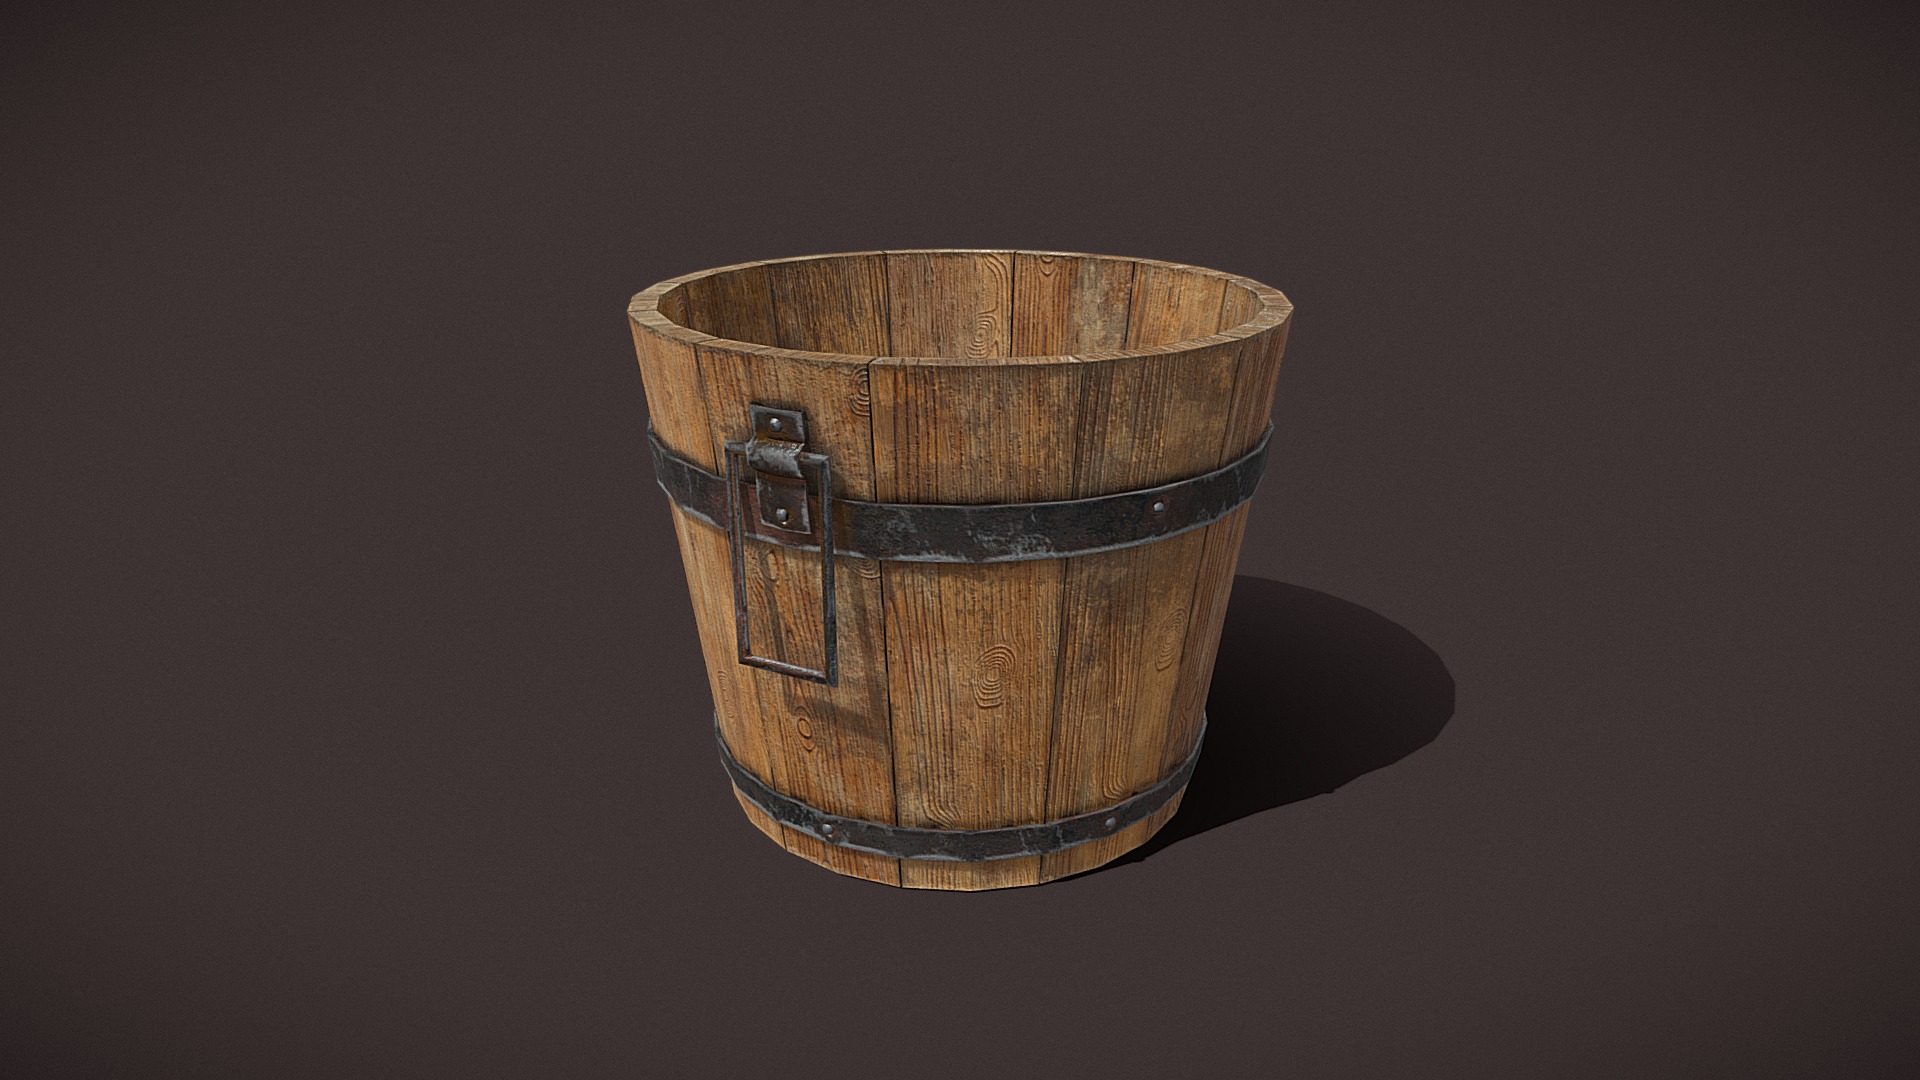 3D model Bucket Wooden - This is a 3D model of the Bucket Wooden. The 3D model is about a wooden barrel with a metal handle.